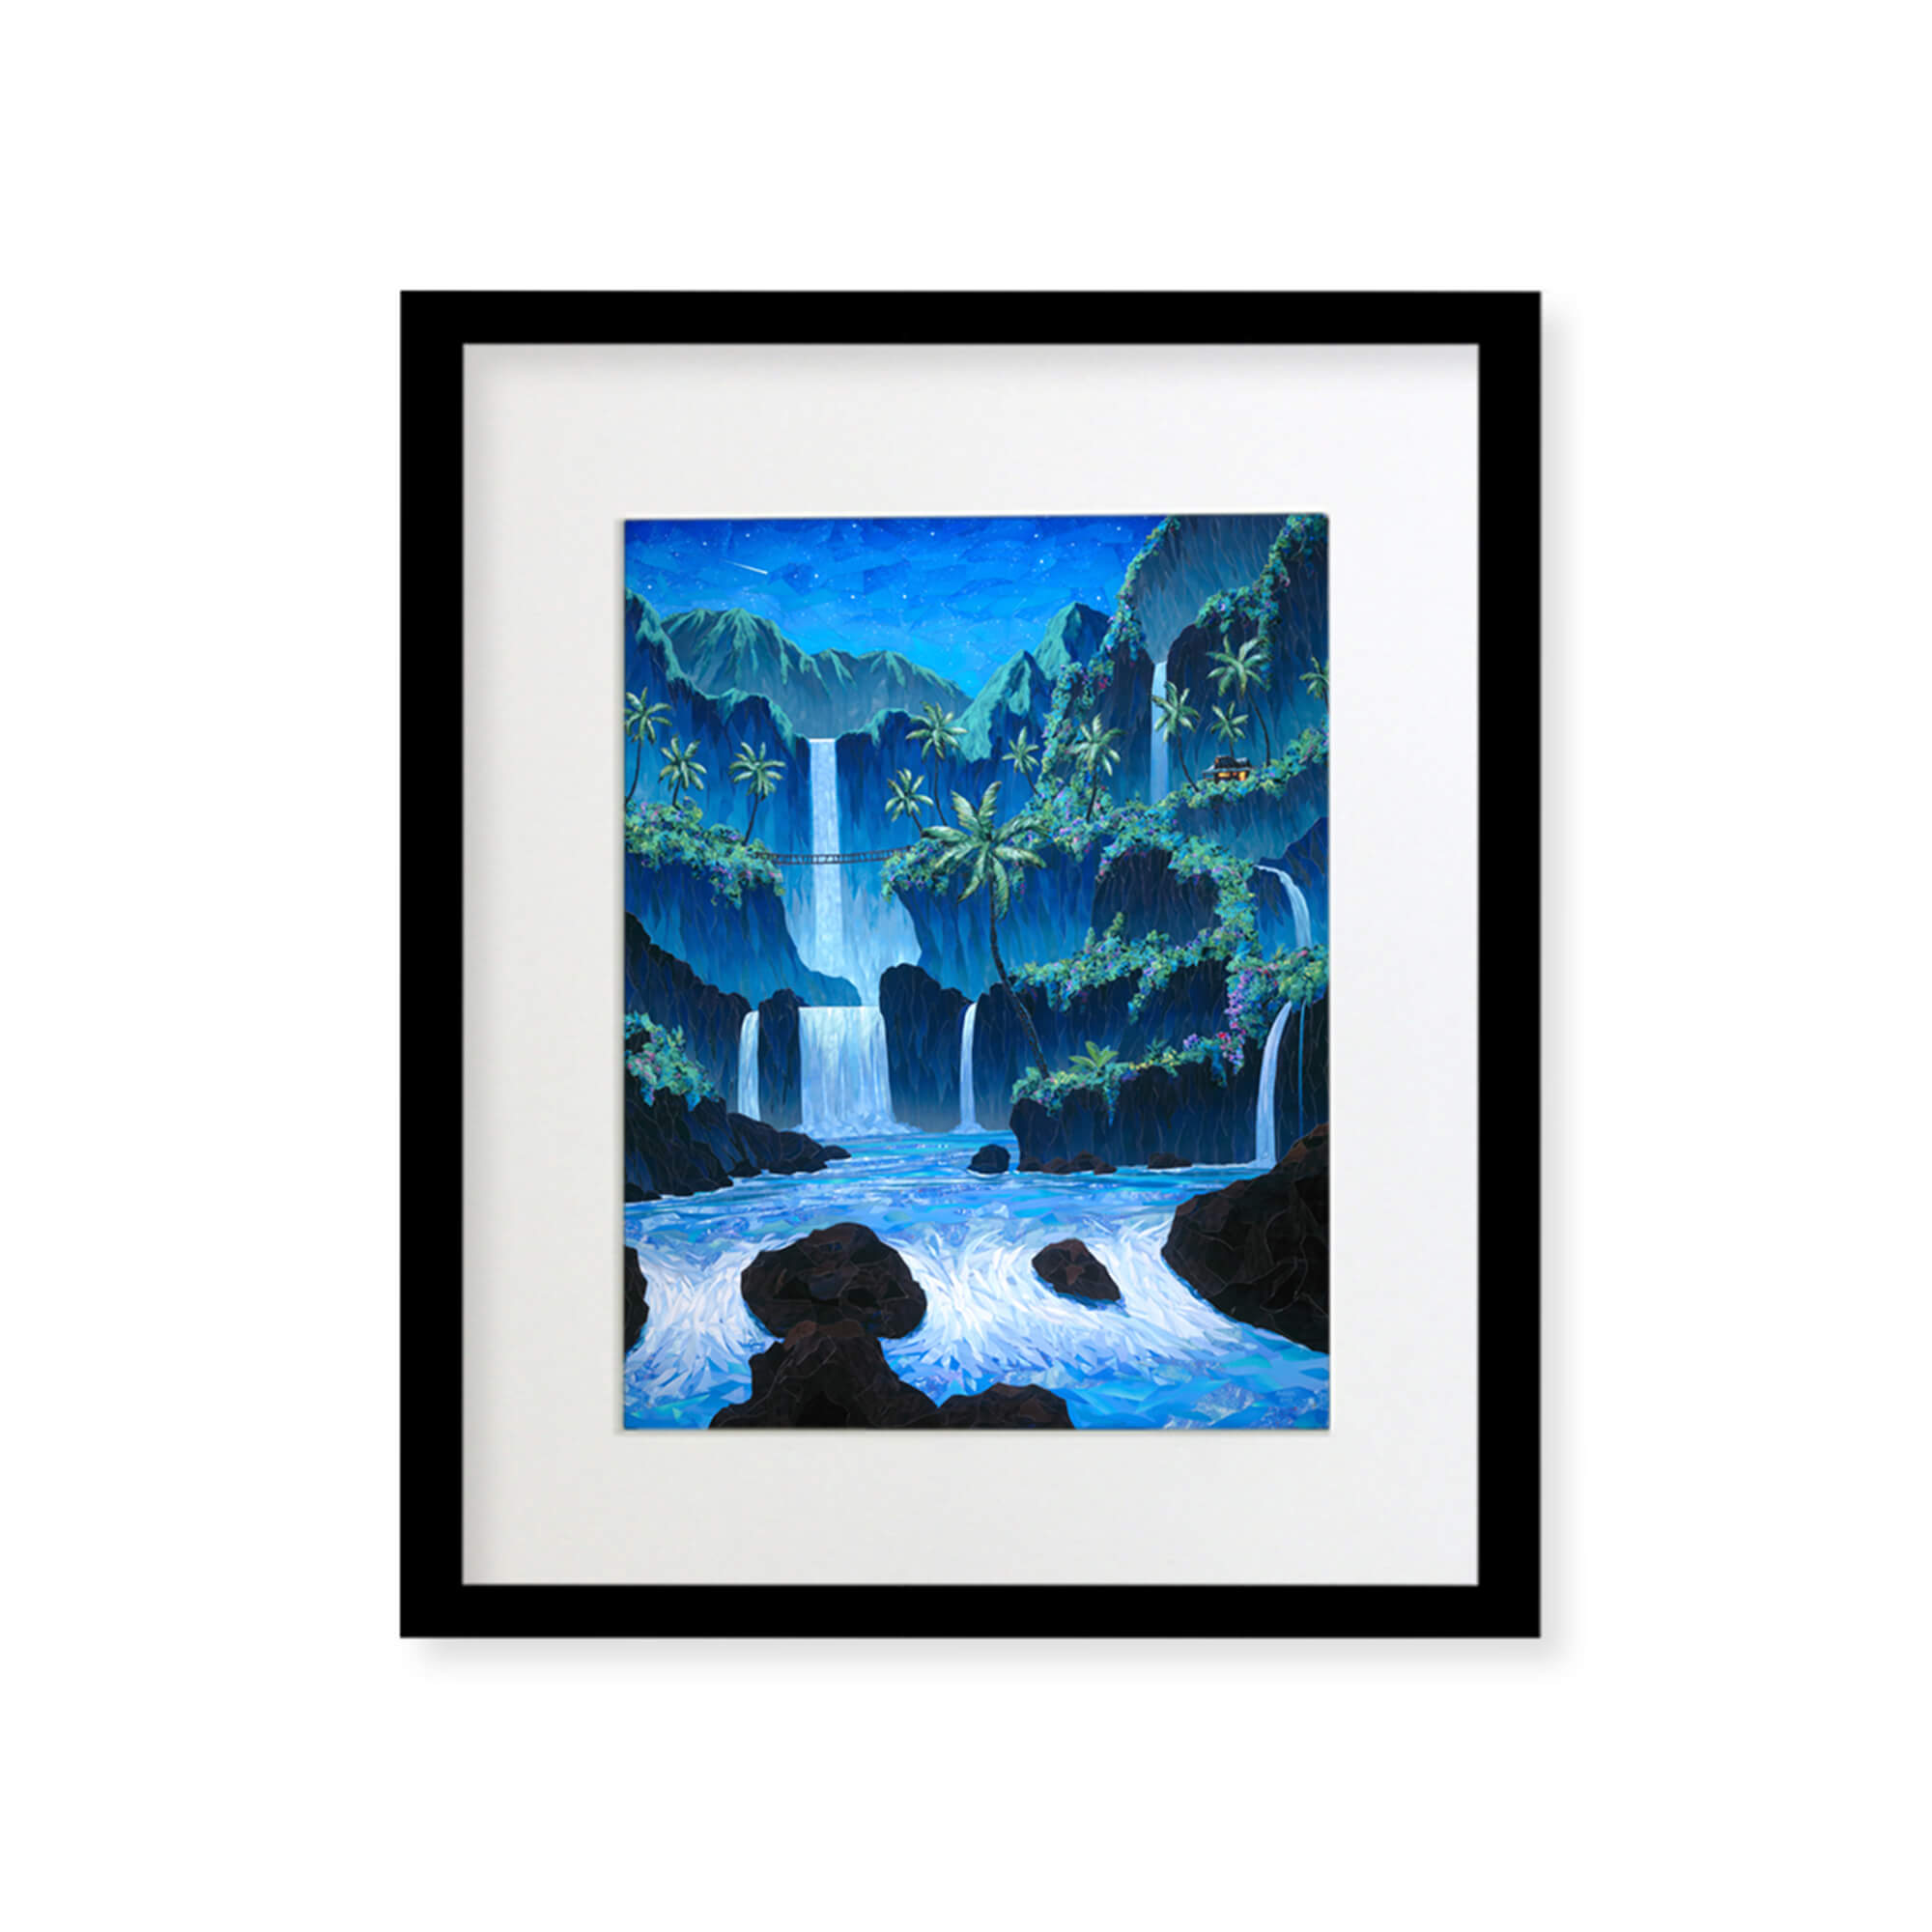 A framed matted art print featuring a collage of a dreamy tropical paradise with several waterfalls, surrounded by Mountains and colorful tropical flowers by Hawaii artist Patrick Parker